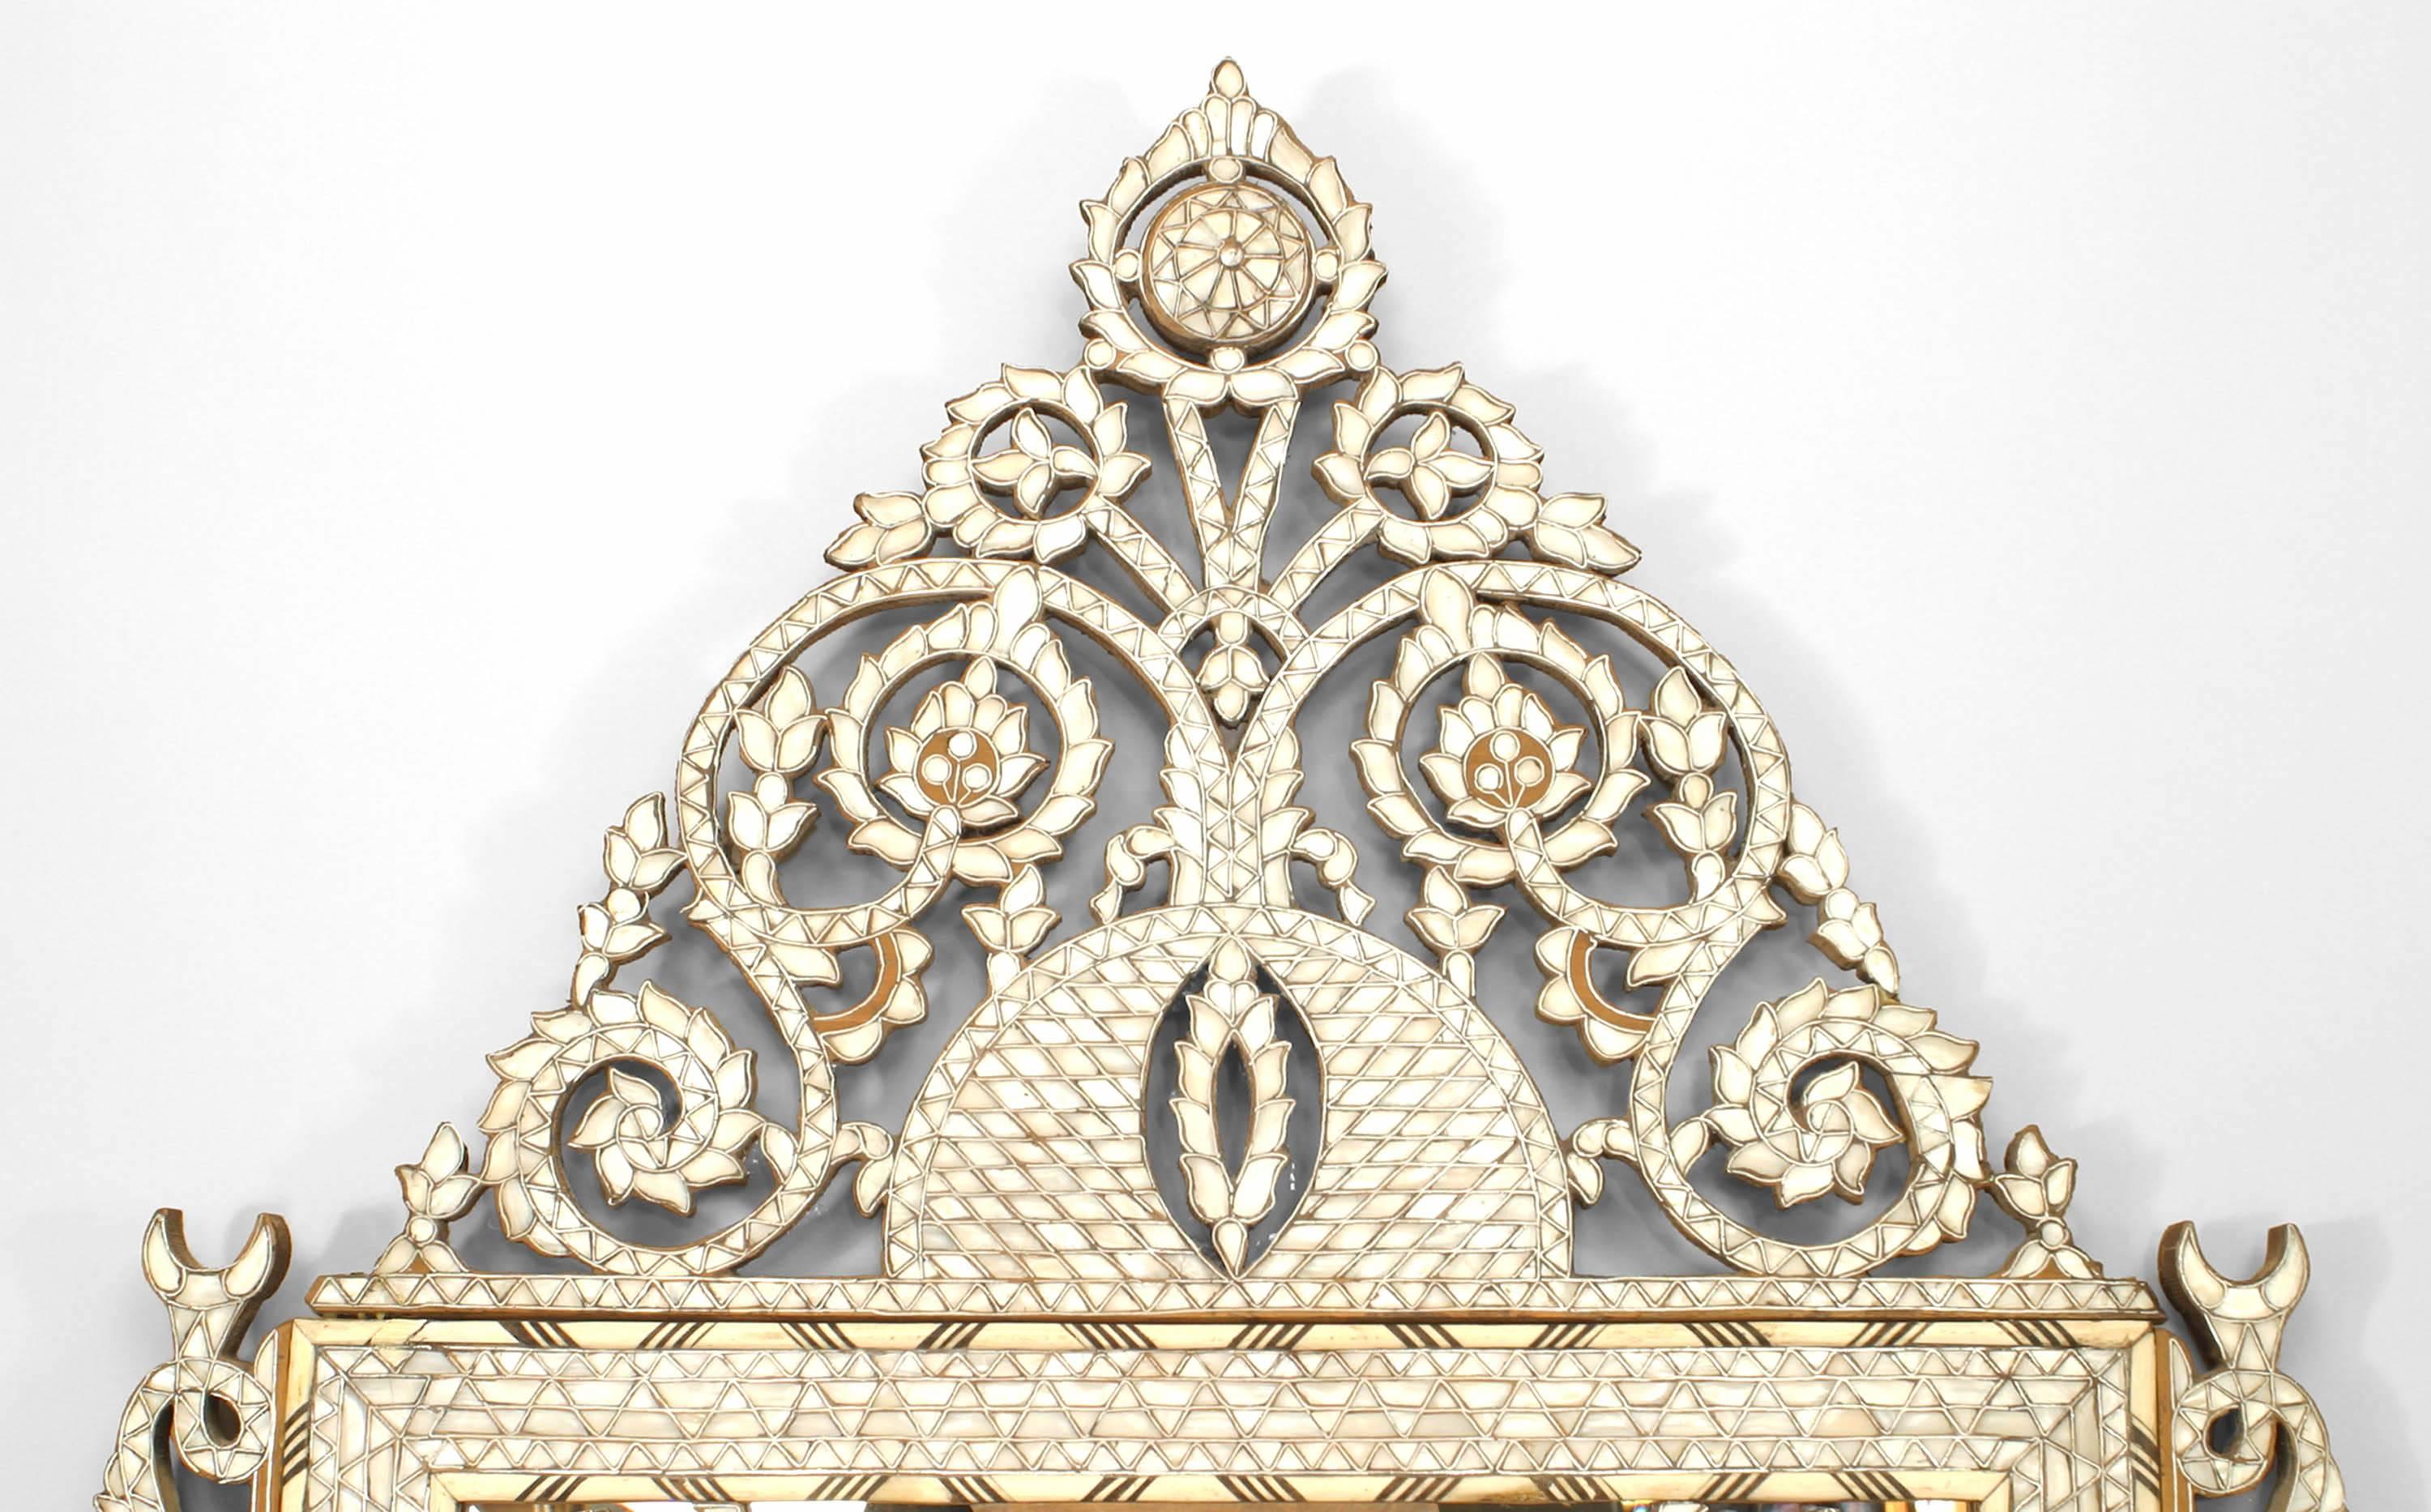 Middle Eastern Syrian (Moorish style) (20th century) wall mirror with inlaid mother-of-pearl, ebony and bone with a shaped filigree floral pediment.
   